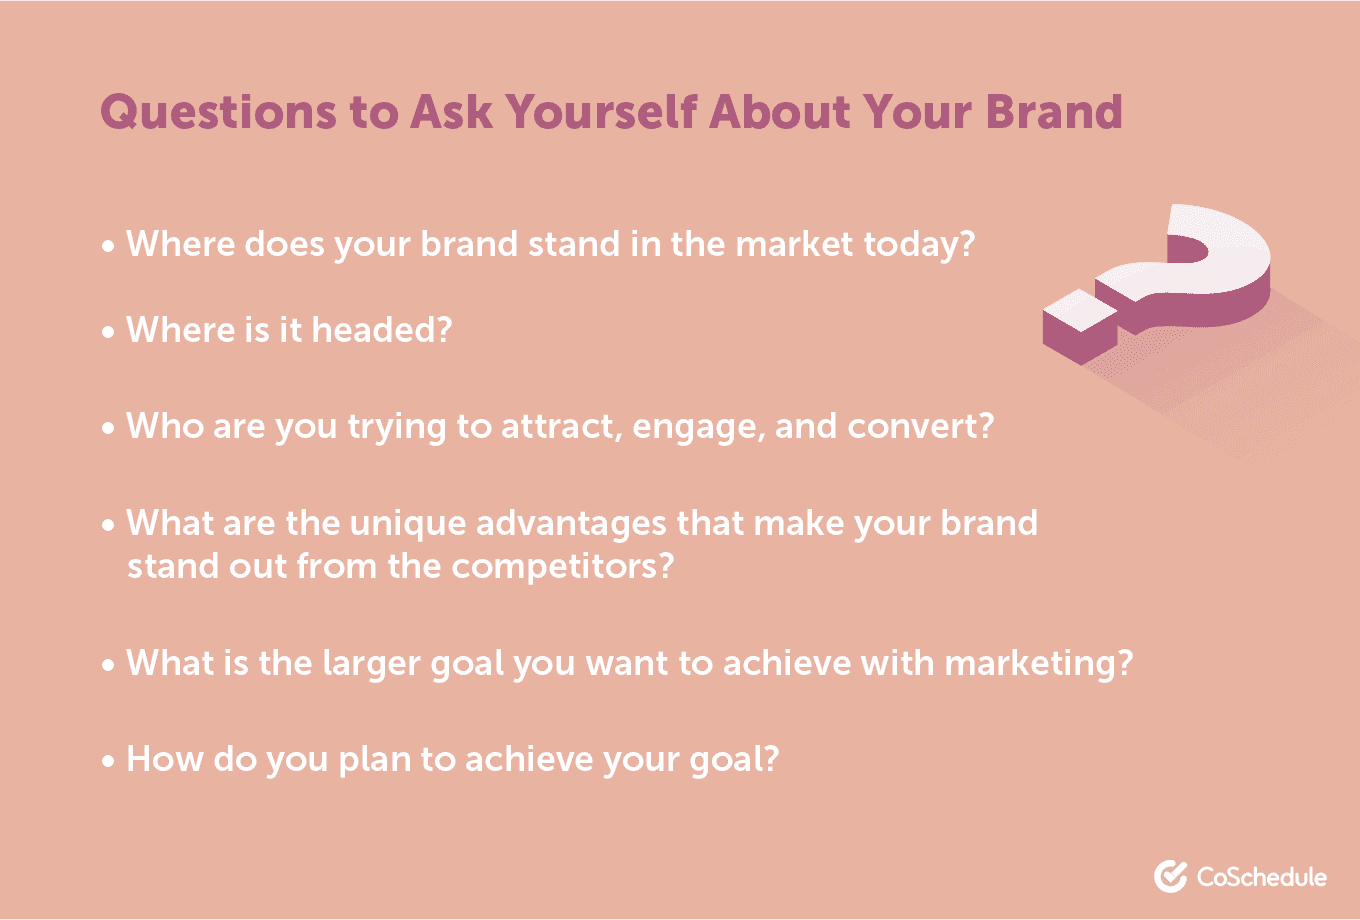 Questions to ask about your brand